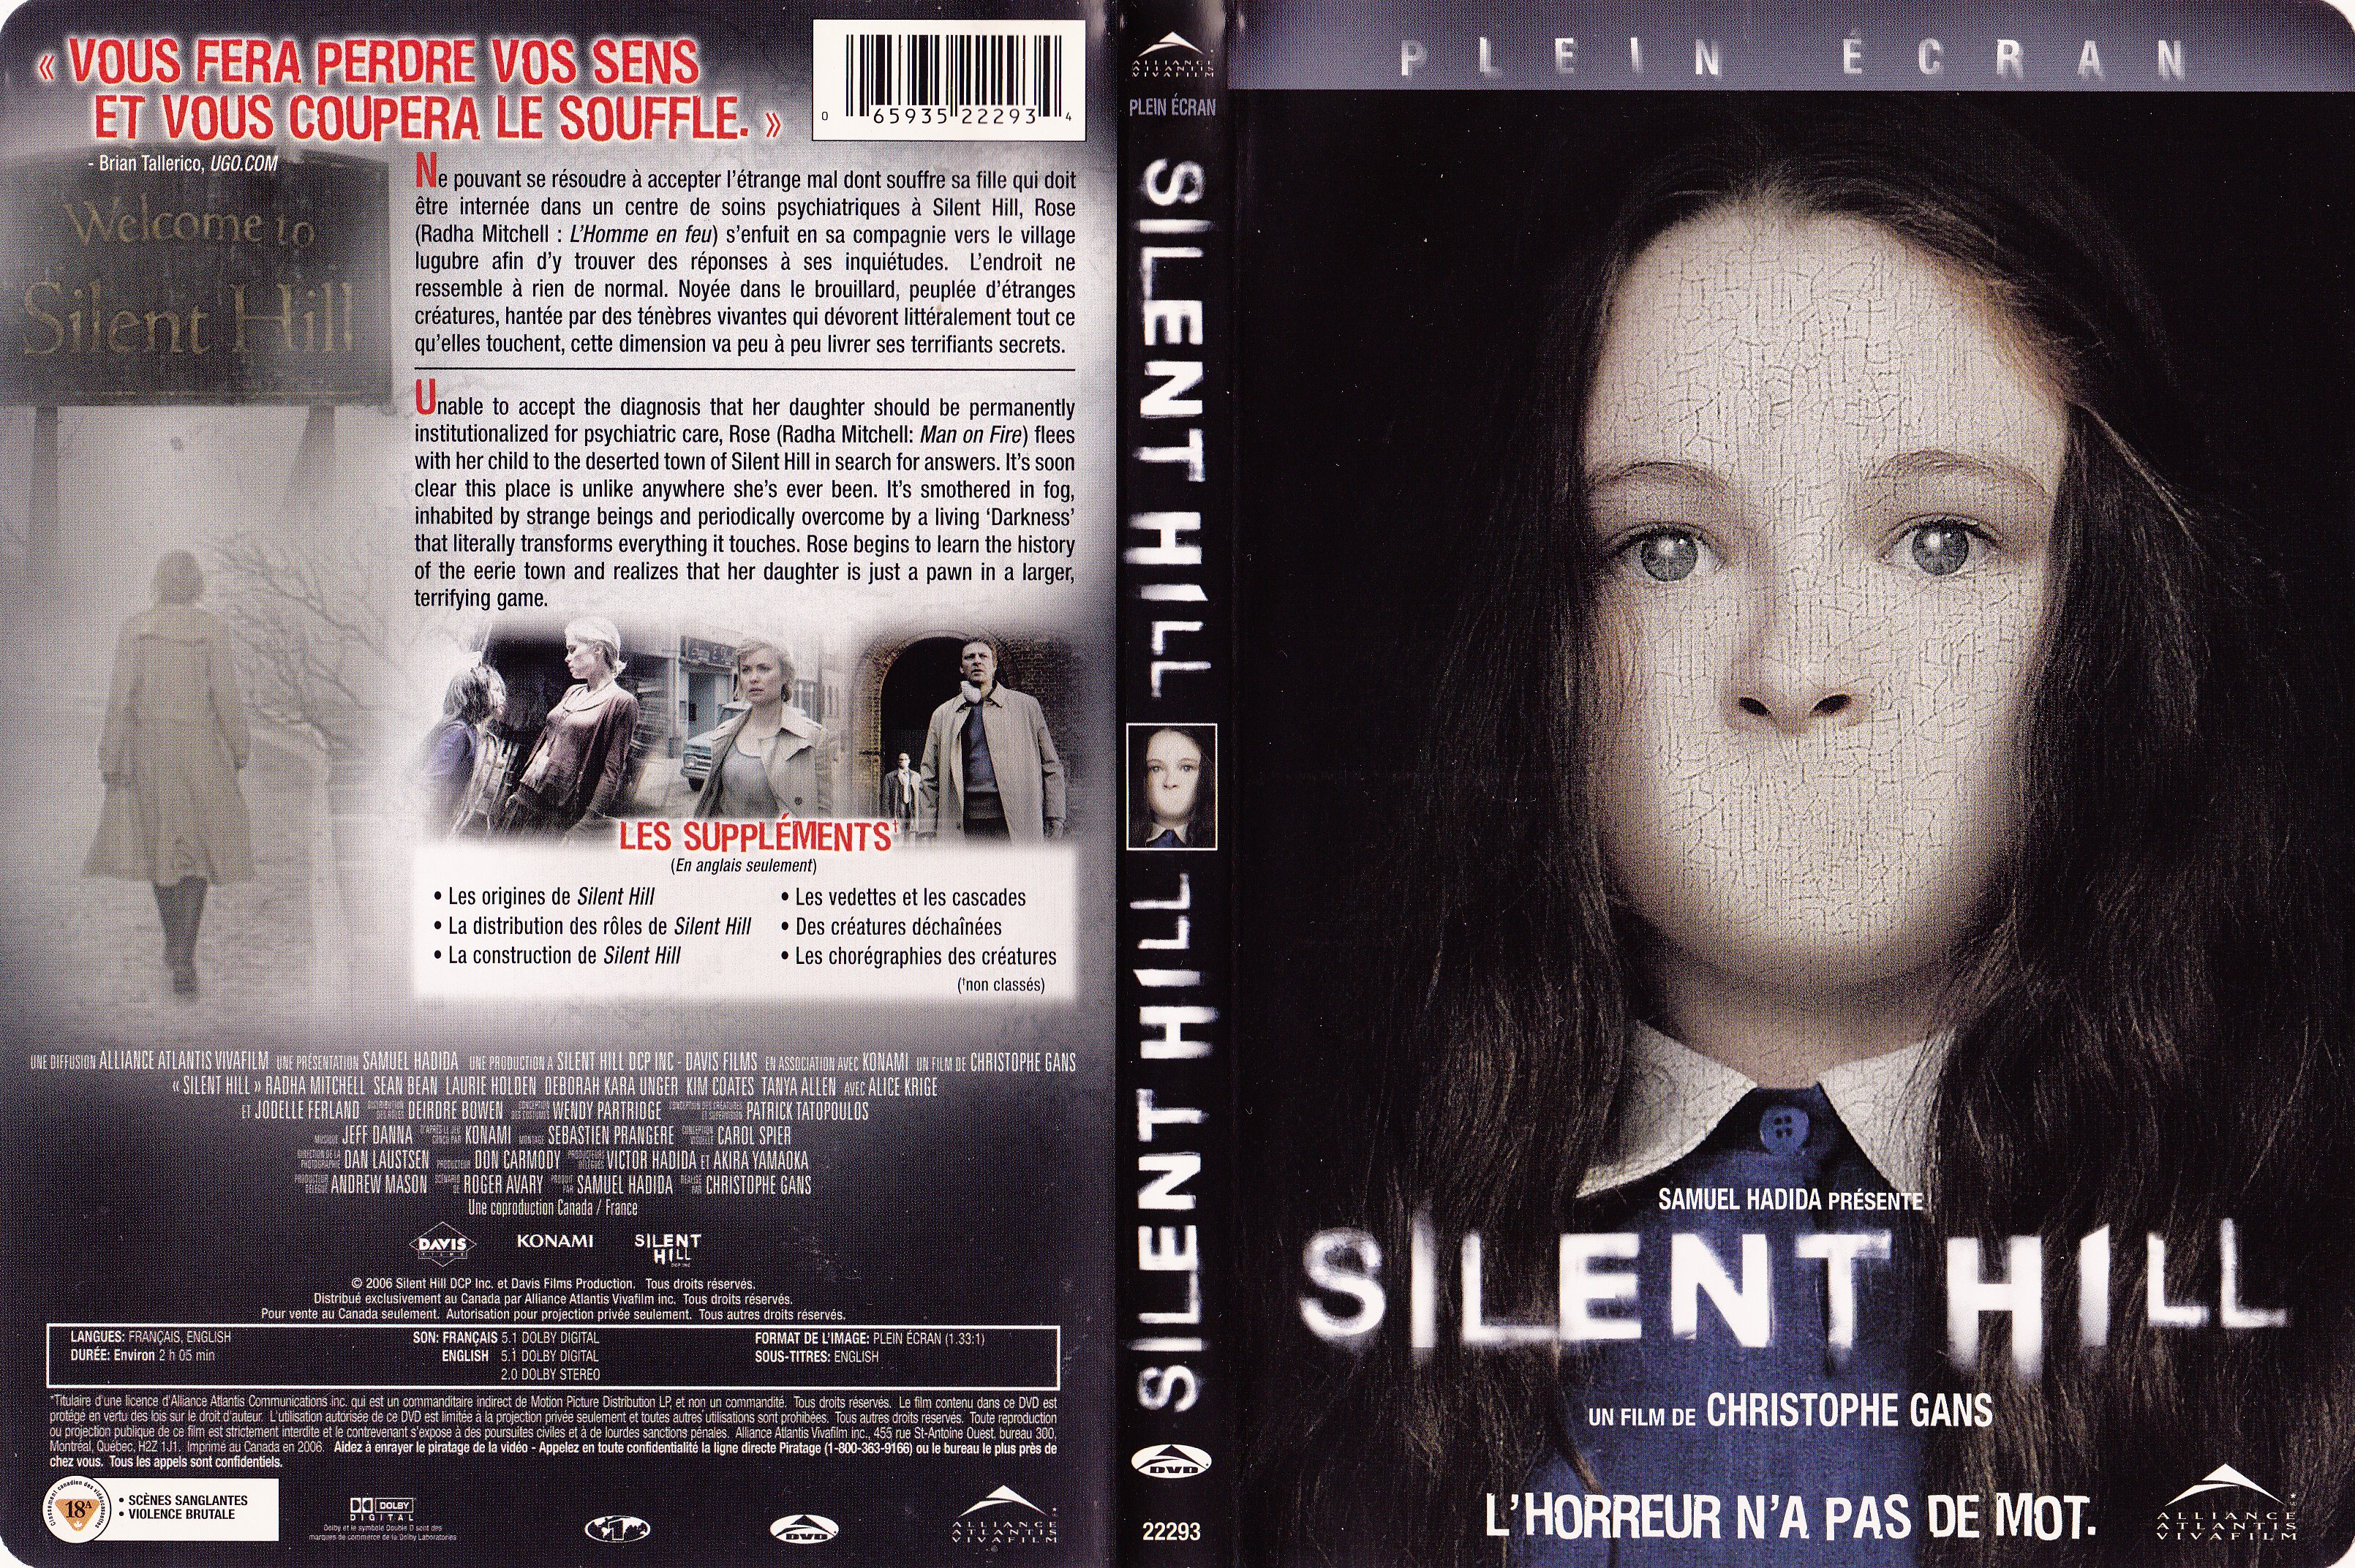 Jaquette DVD Silent hill (Canadienne)